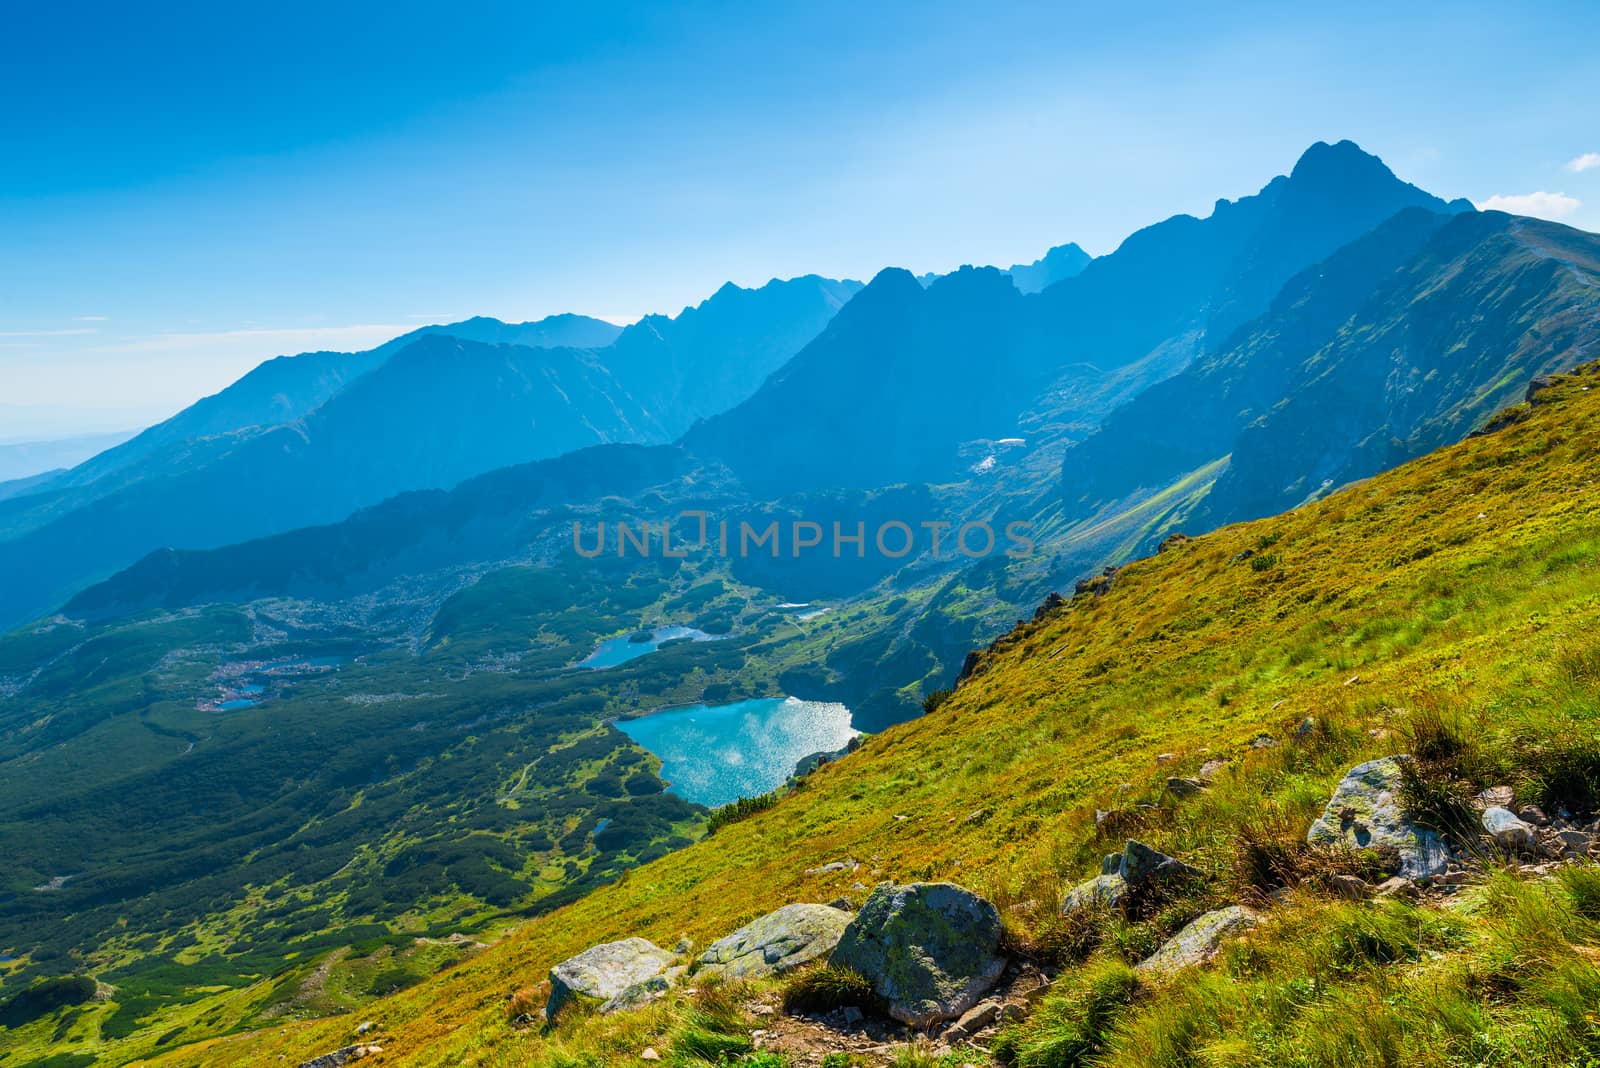 Beautiful scenic landscape, shot in the Tatra Mountains In Poland